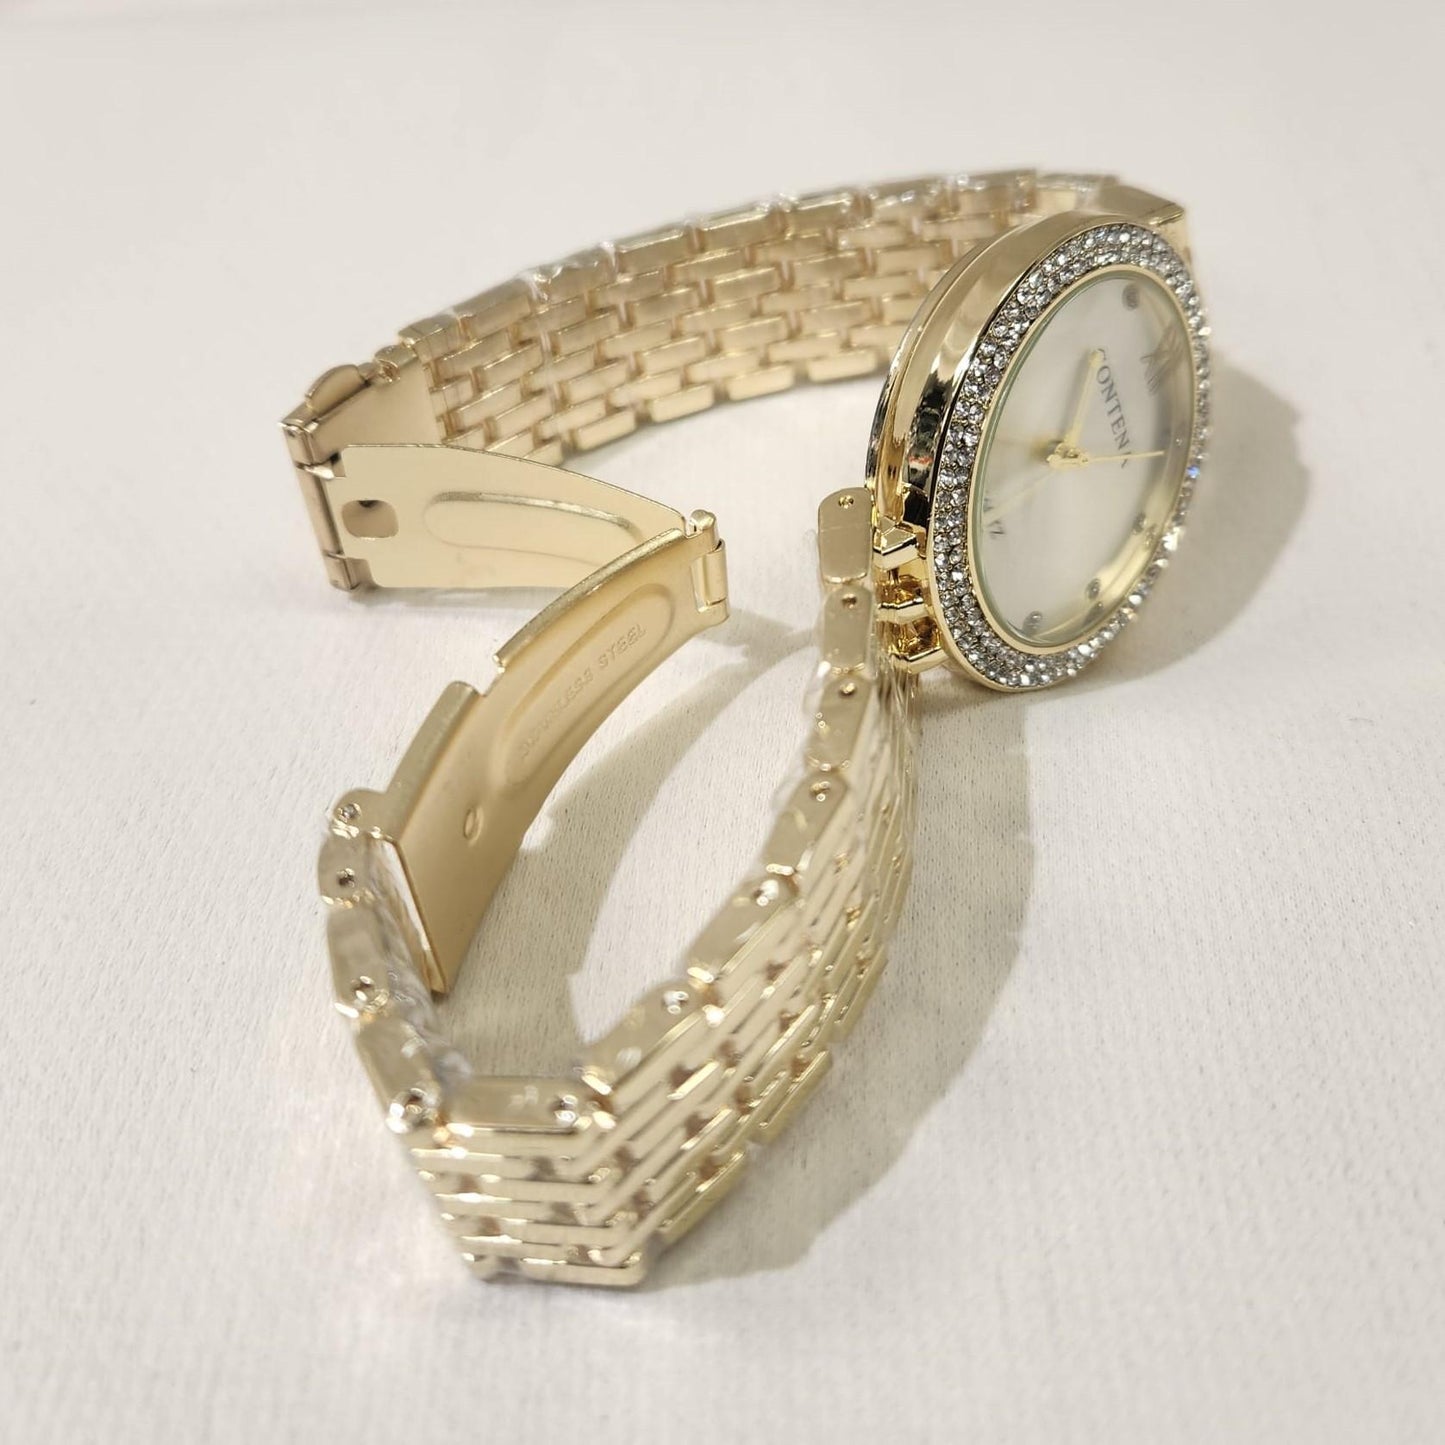 Folding clasp of gold watch with stone studded face